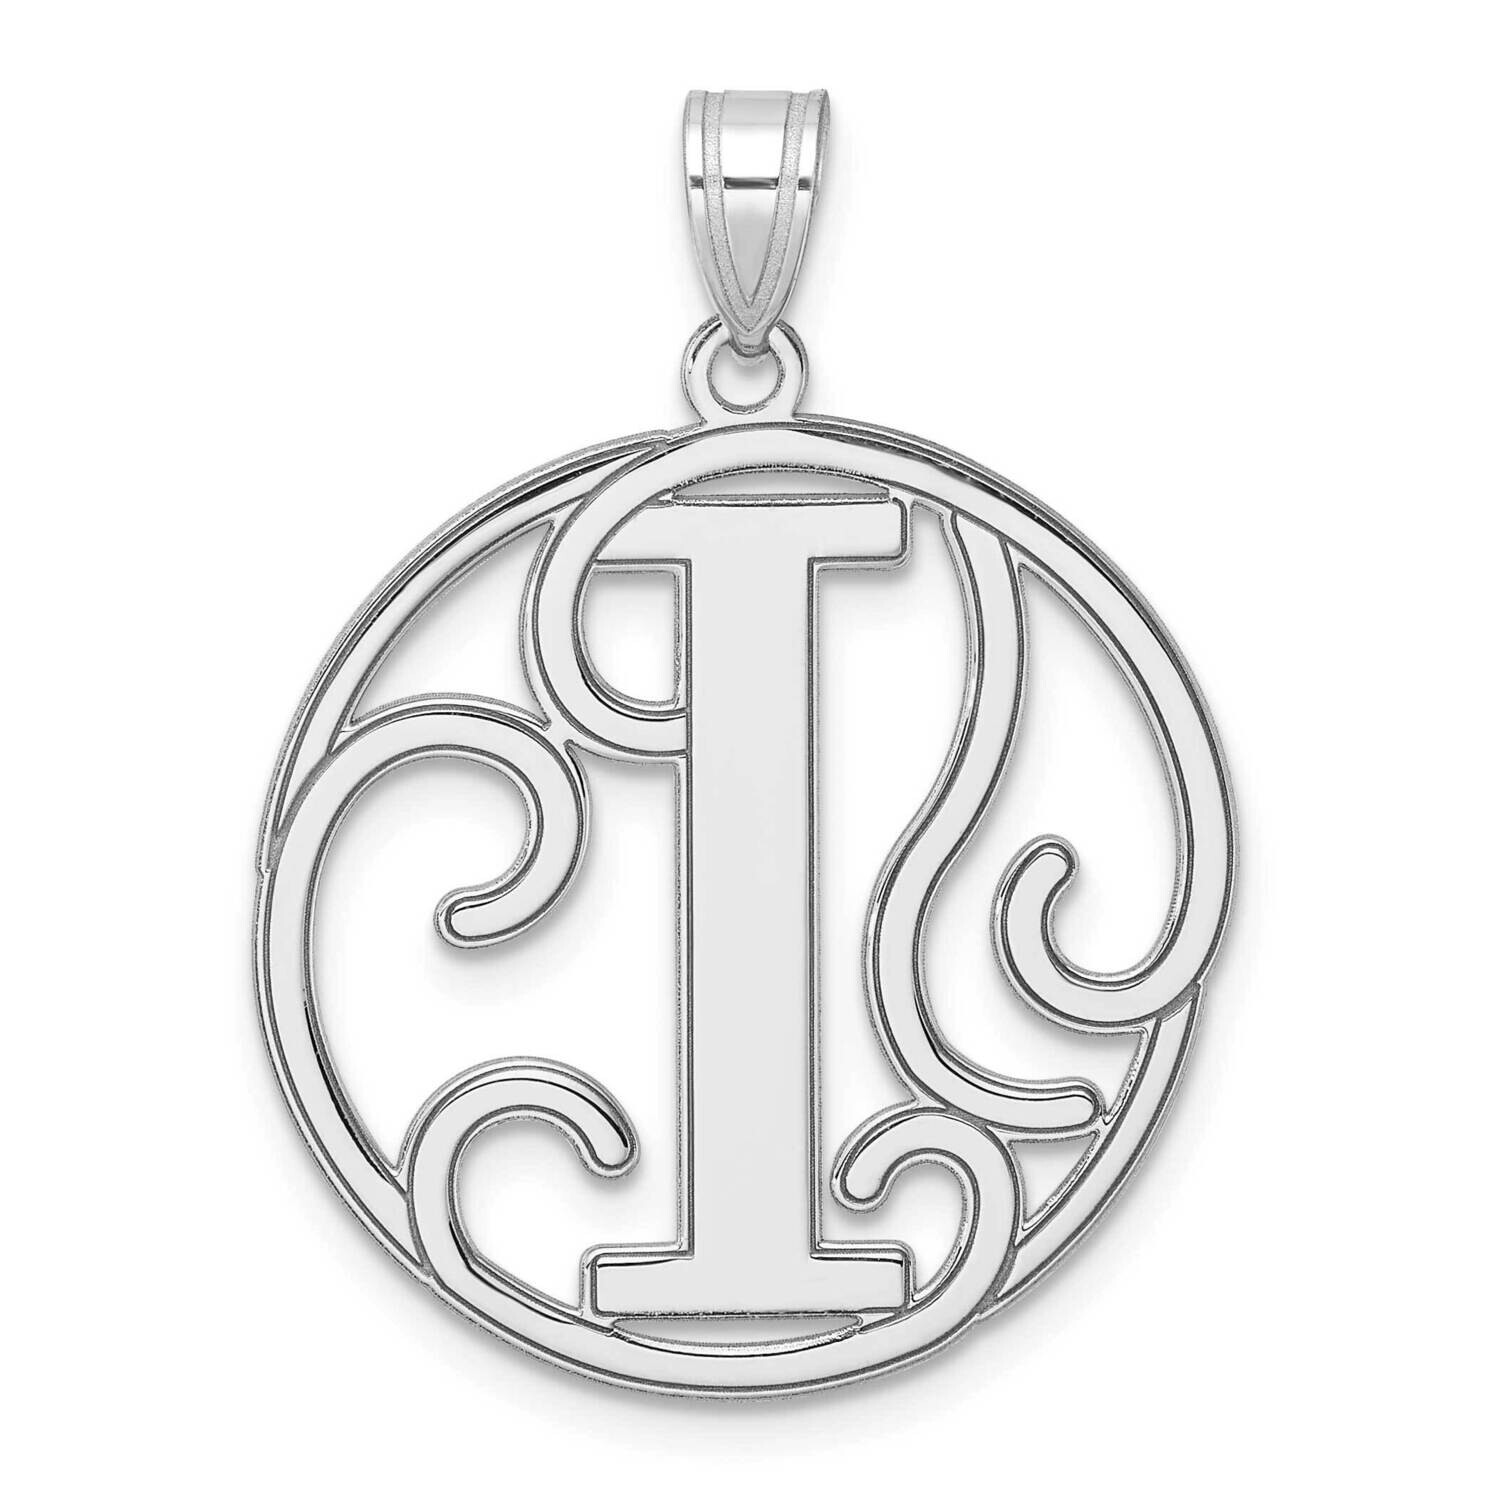 Large Fancy Script Letter I Initial Pendant Sterling Silver Rhodium-Plated QC11258I